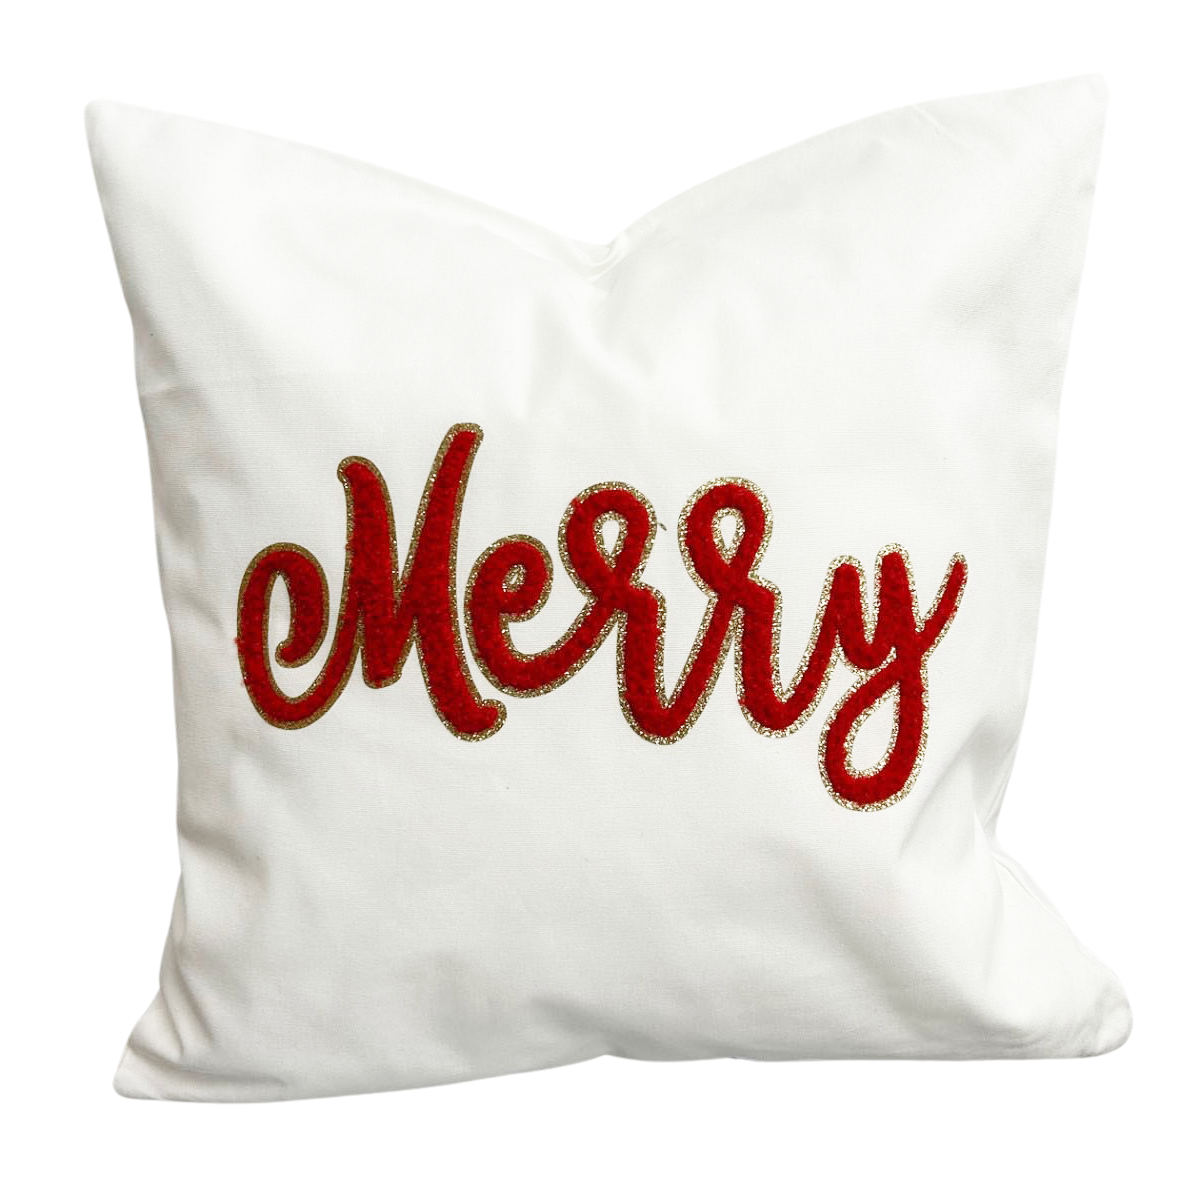 Grinchy & Merry Double Sided Pillow